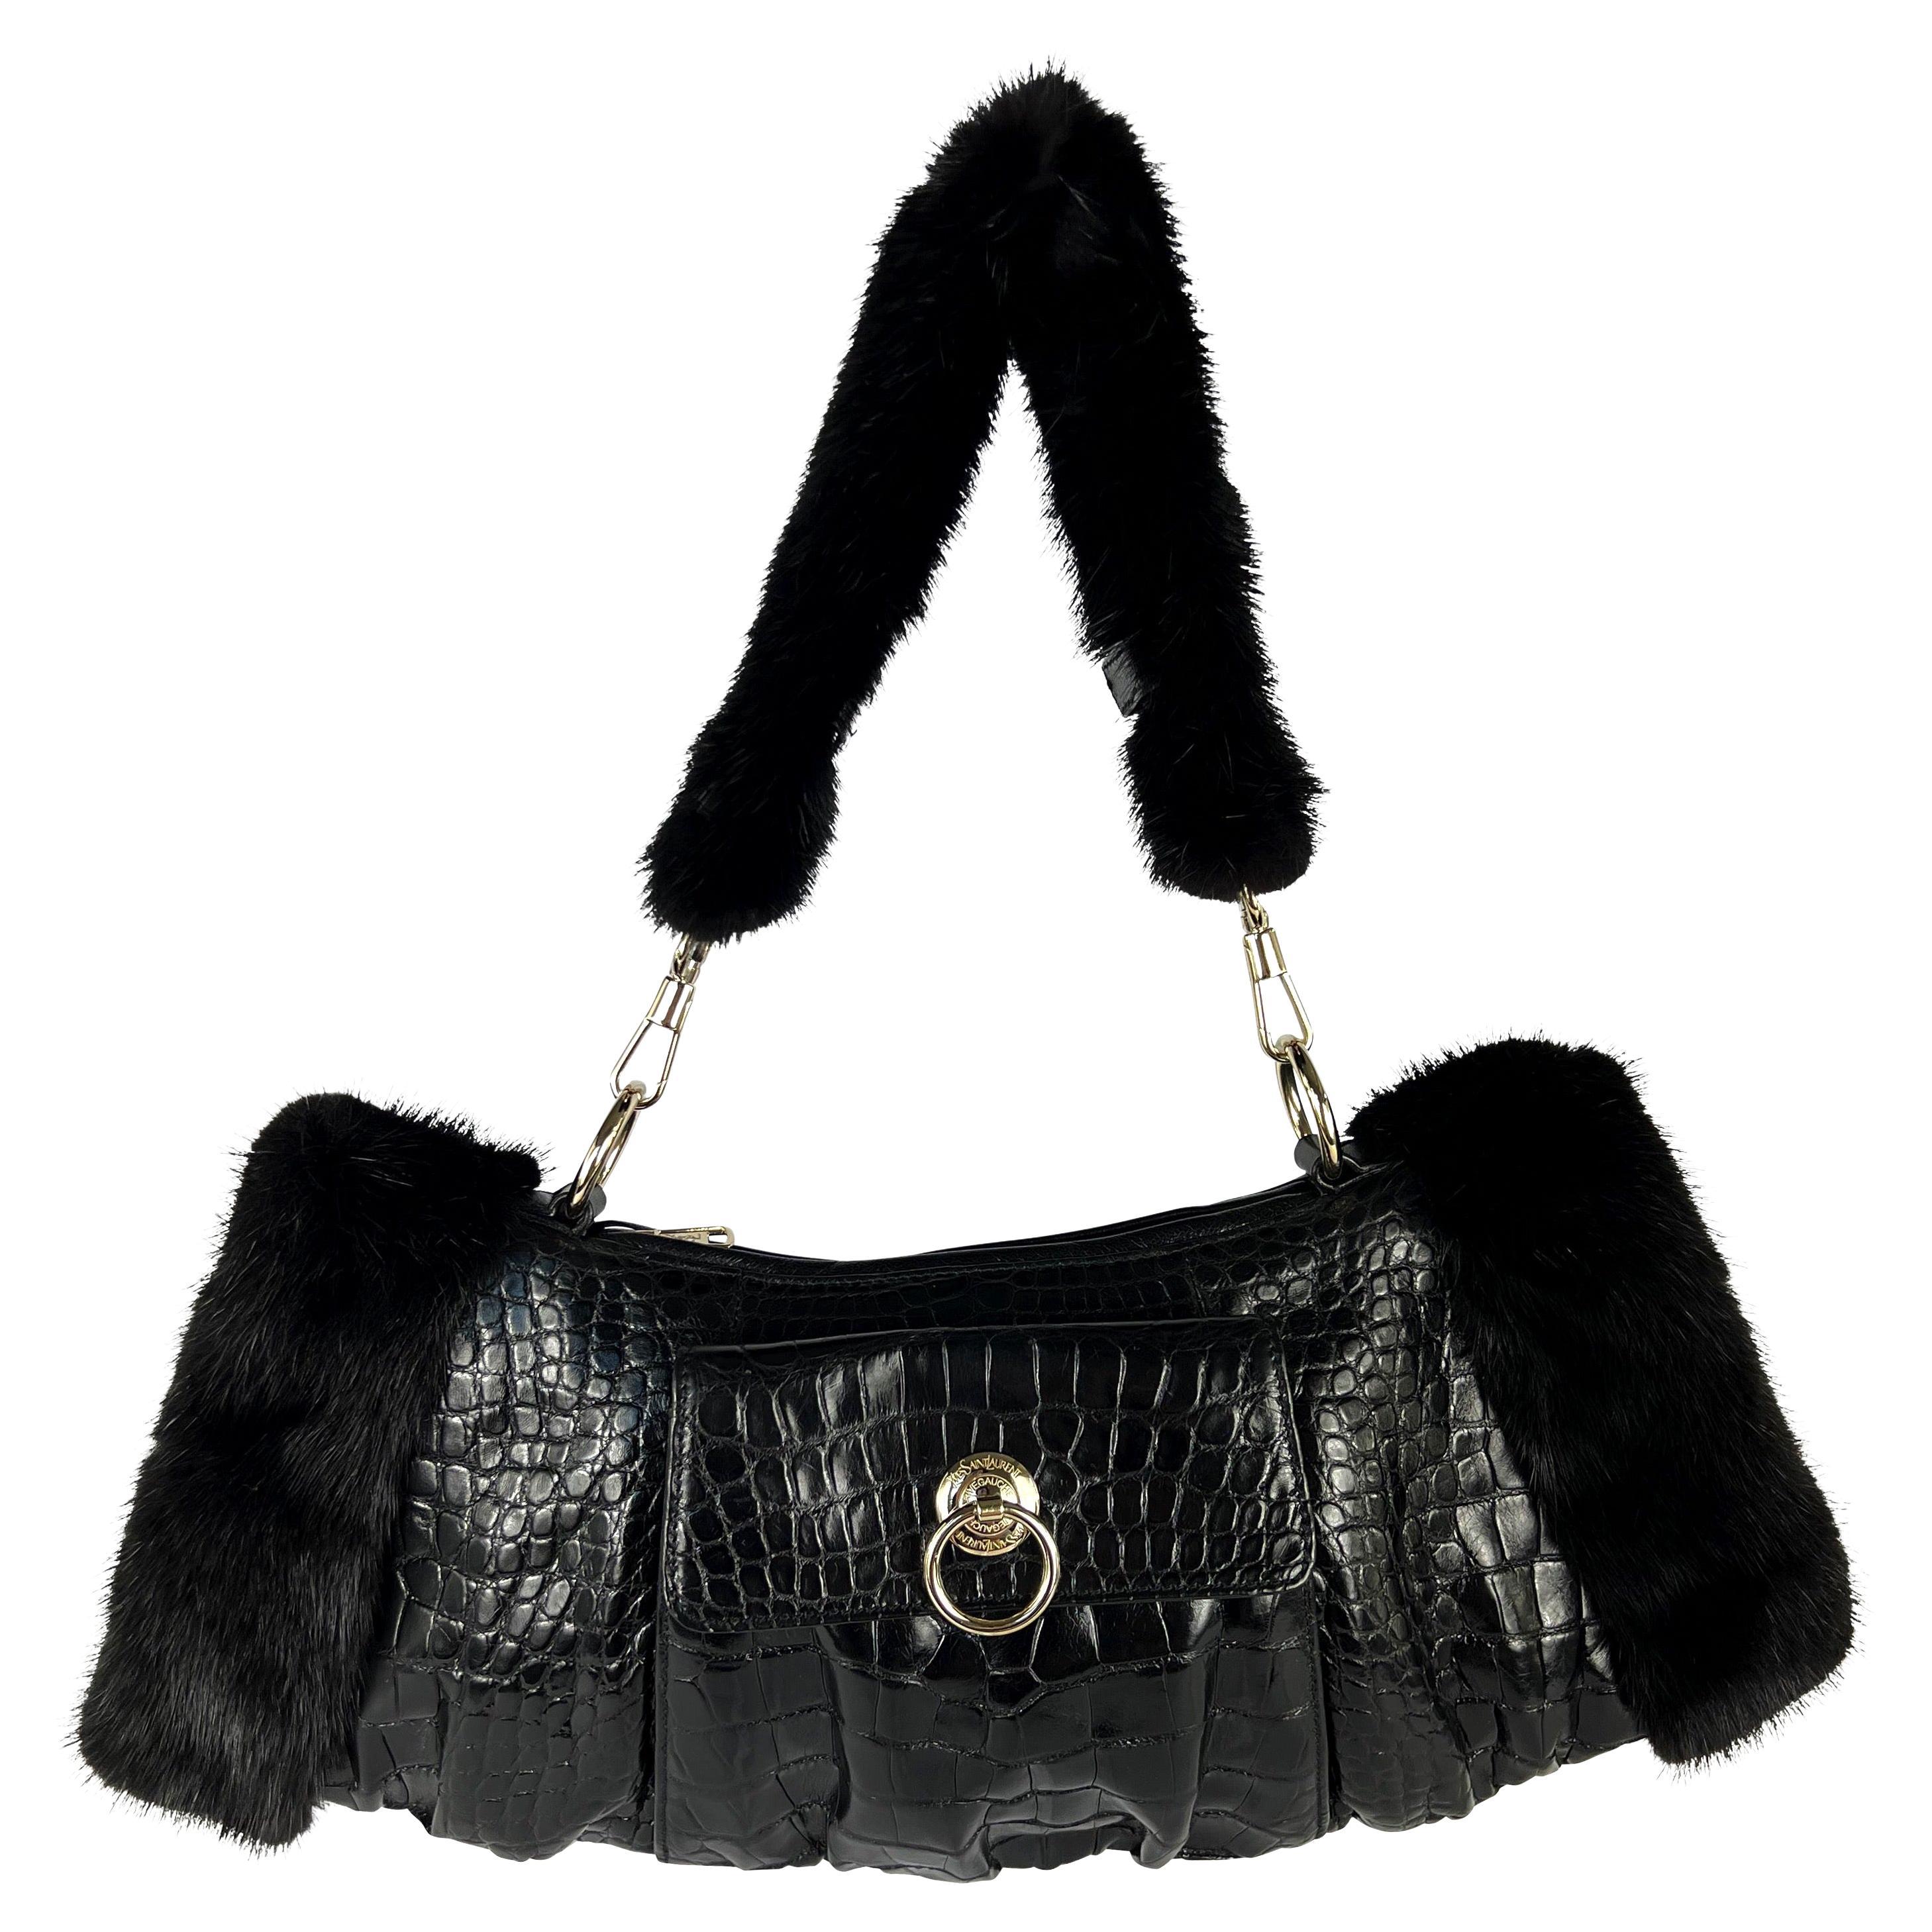 F/W 2004 Yves Saint Laurent by Tom Ford Mink Trimmed Croc Muff Clutch Bag For Sale